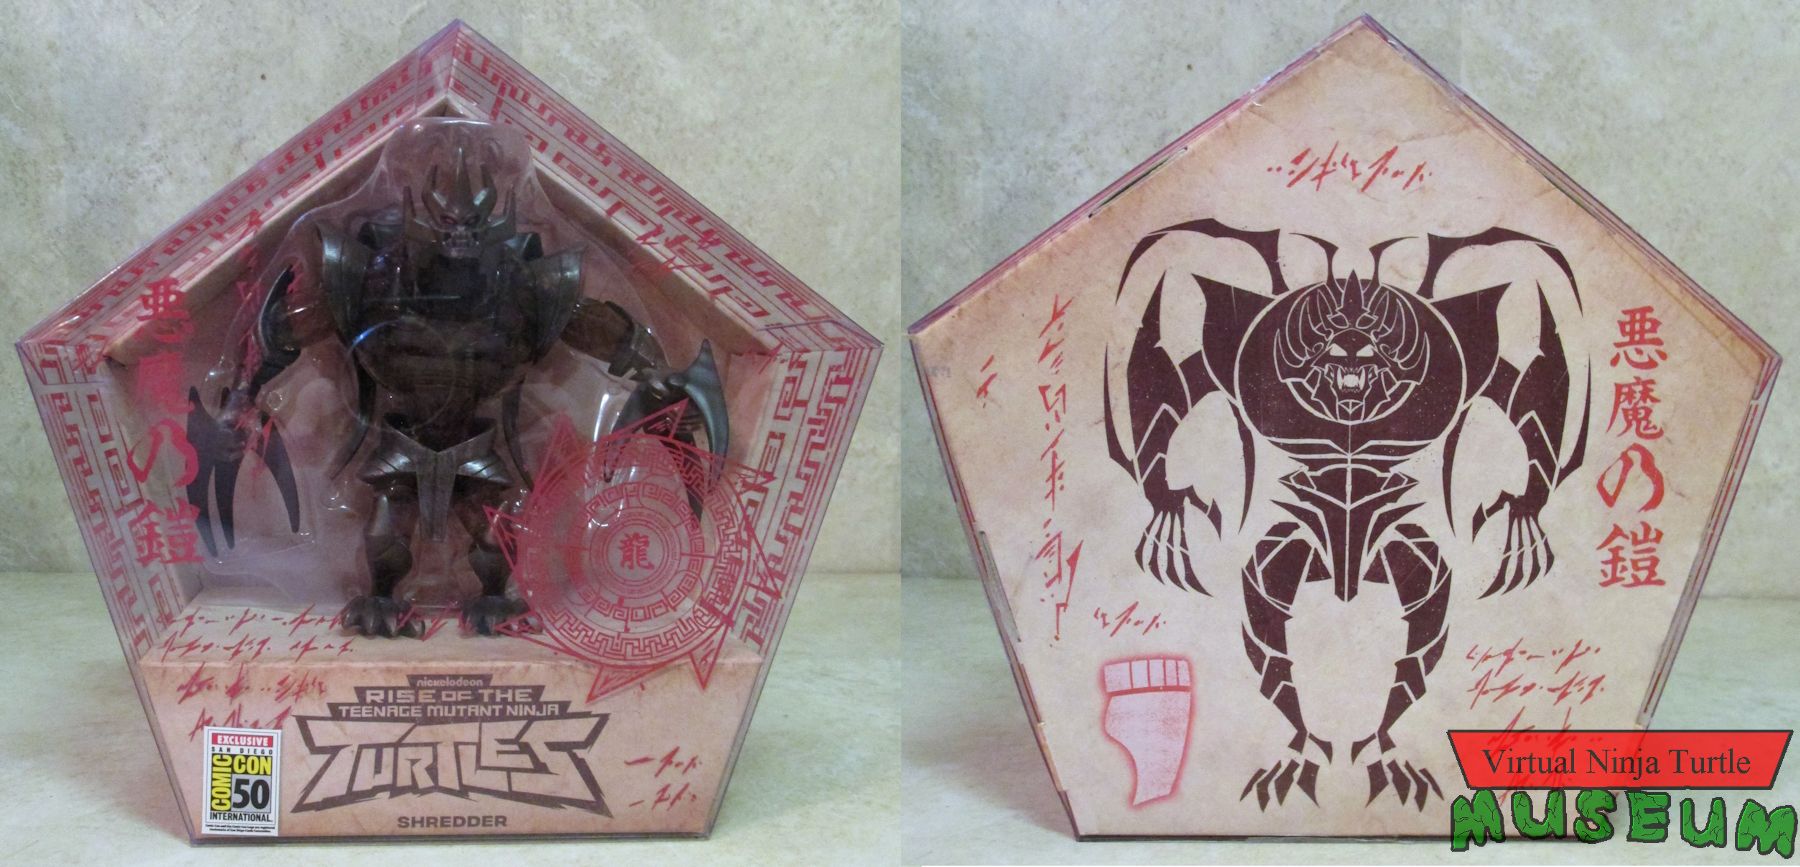 inner packaging front and back